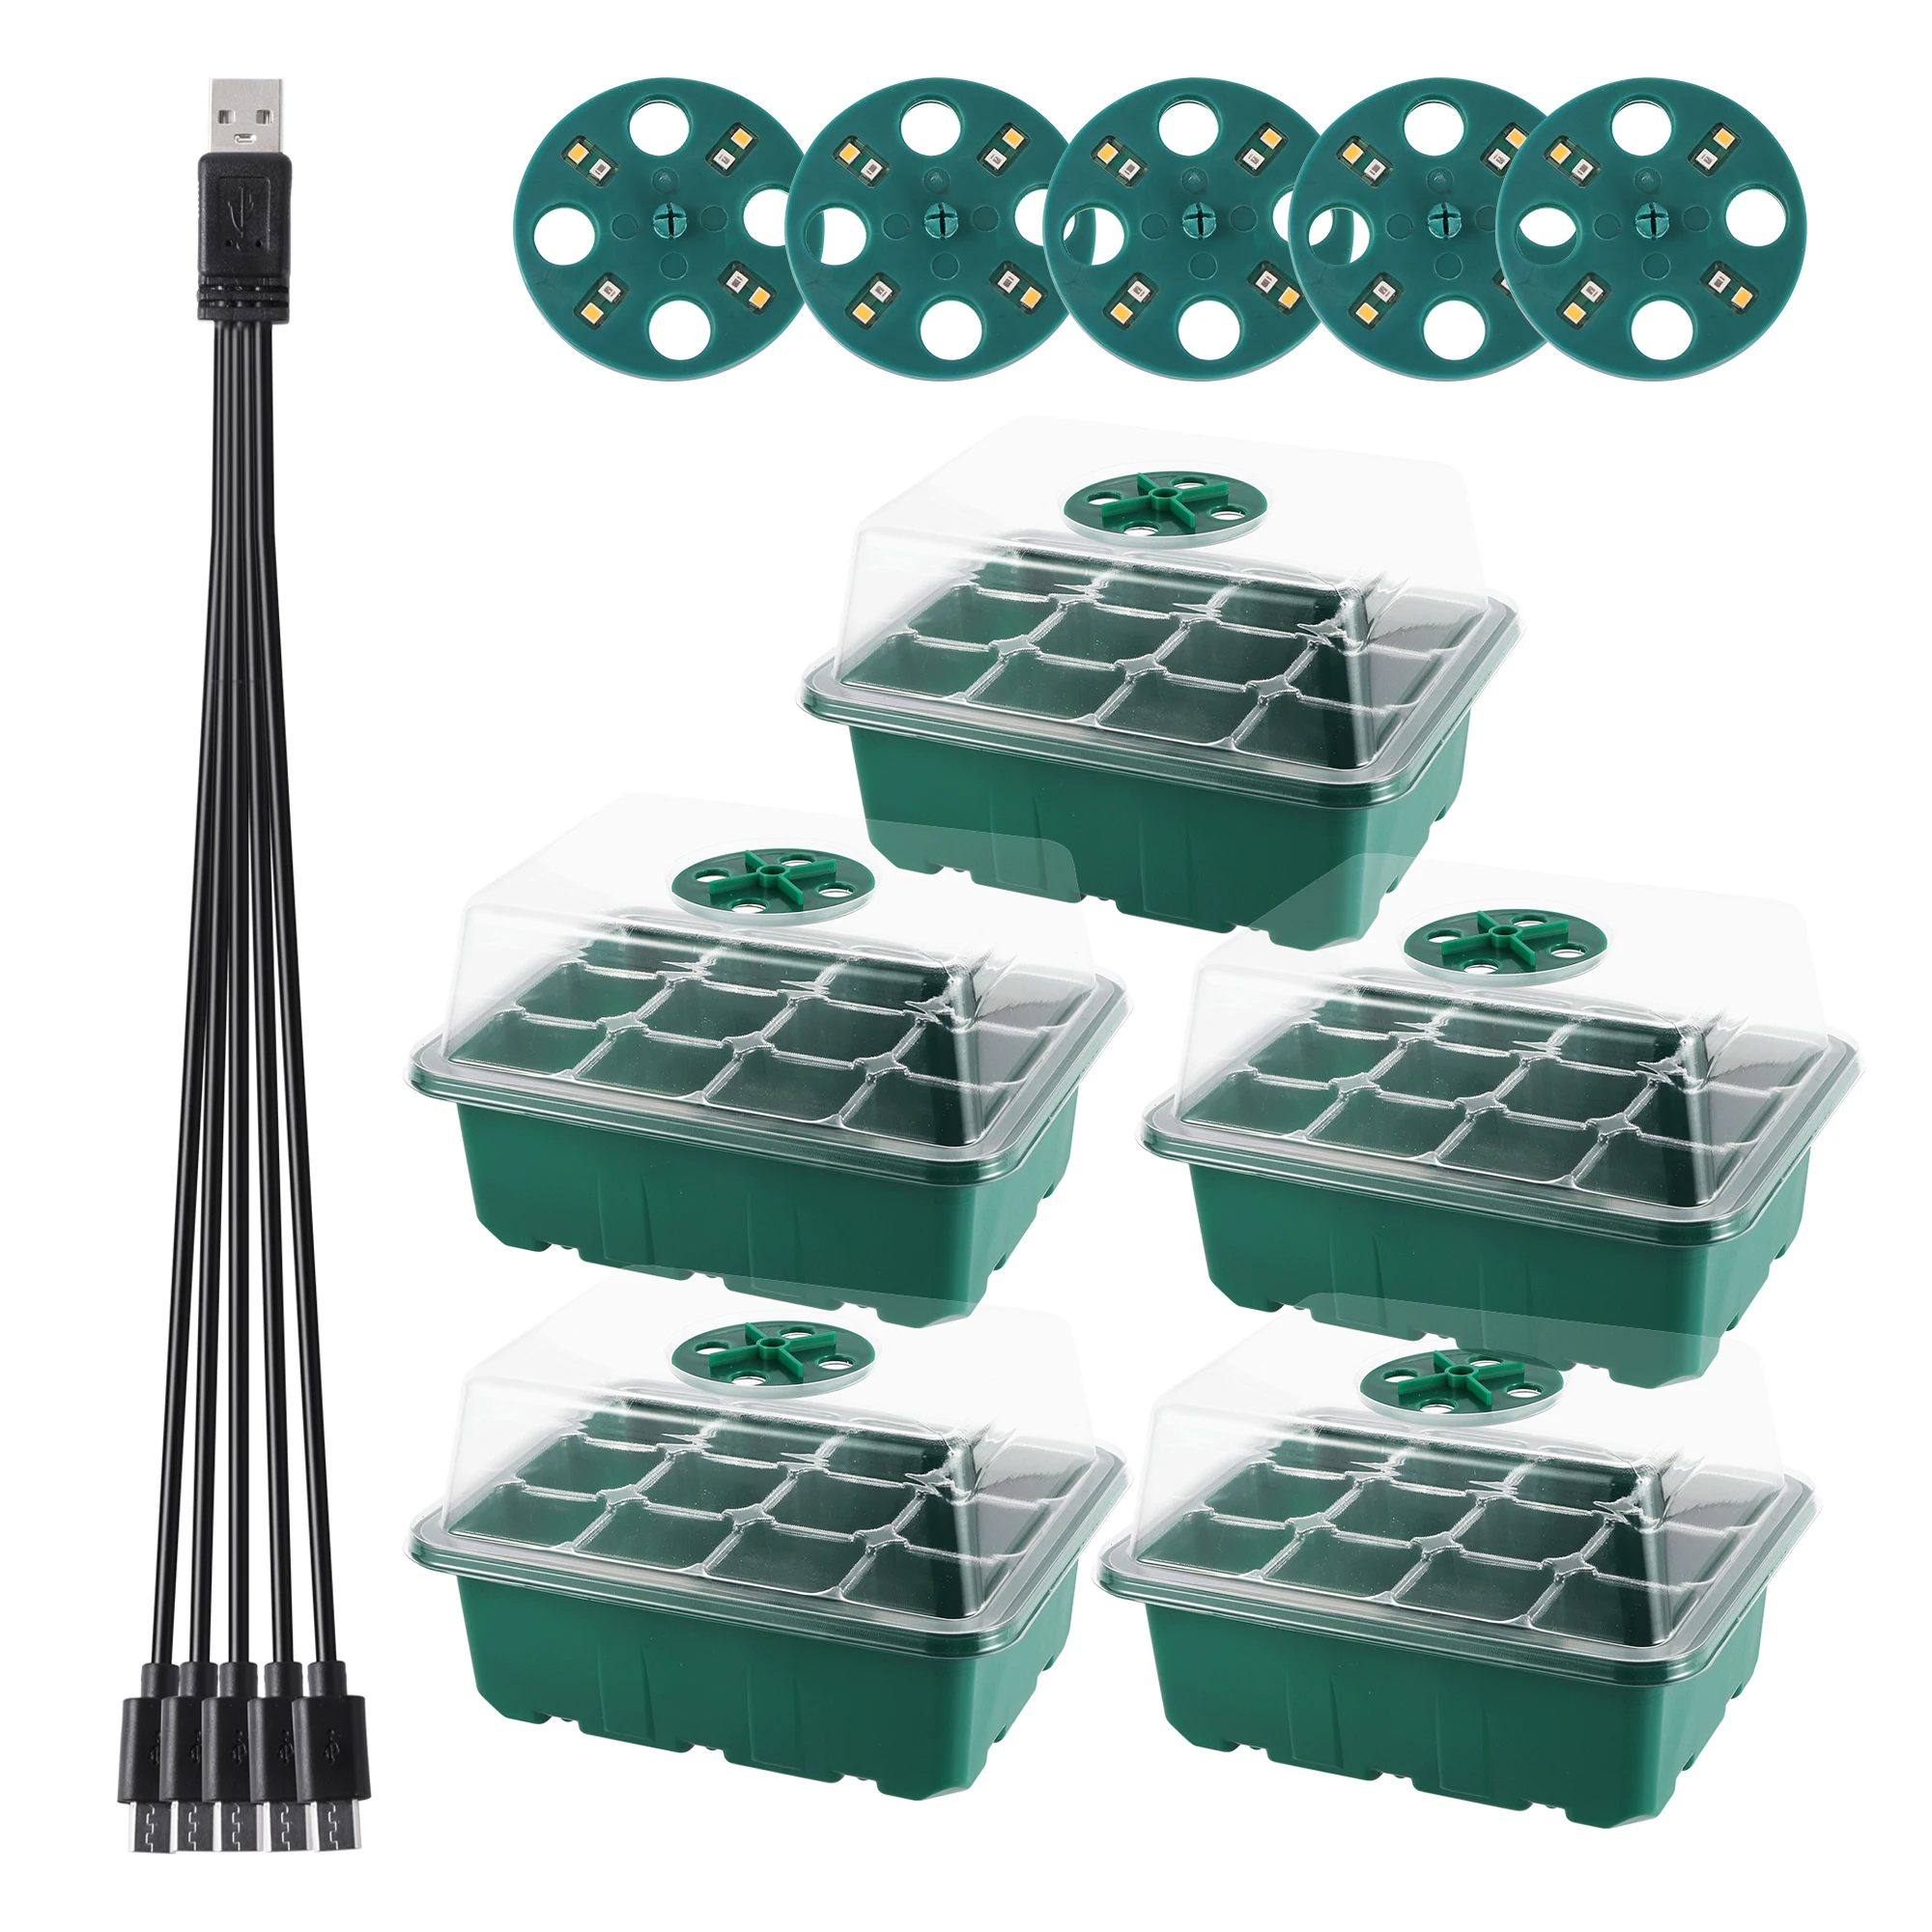 Seed Starter Trays with Grow Light, Seeding Starter Kits with Humidity Domes Cover, Indoor Gardening Plant Germination Trays